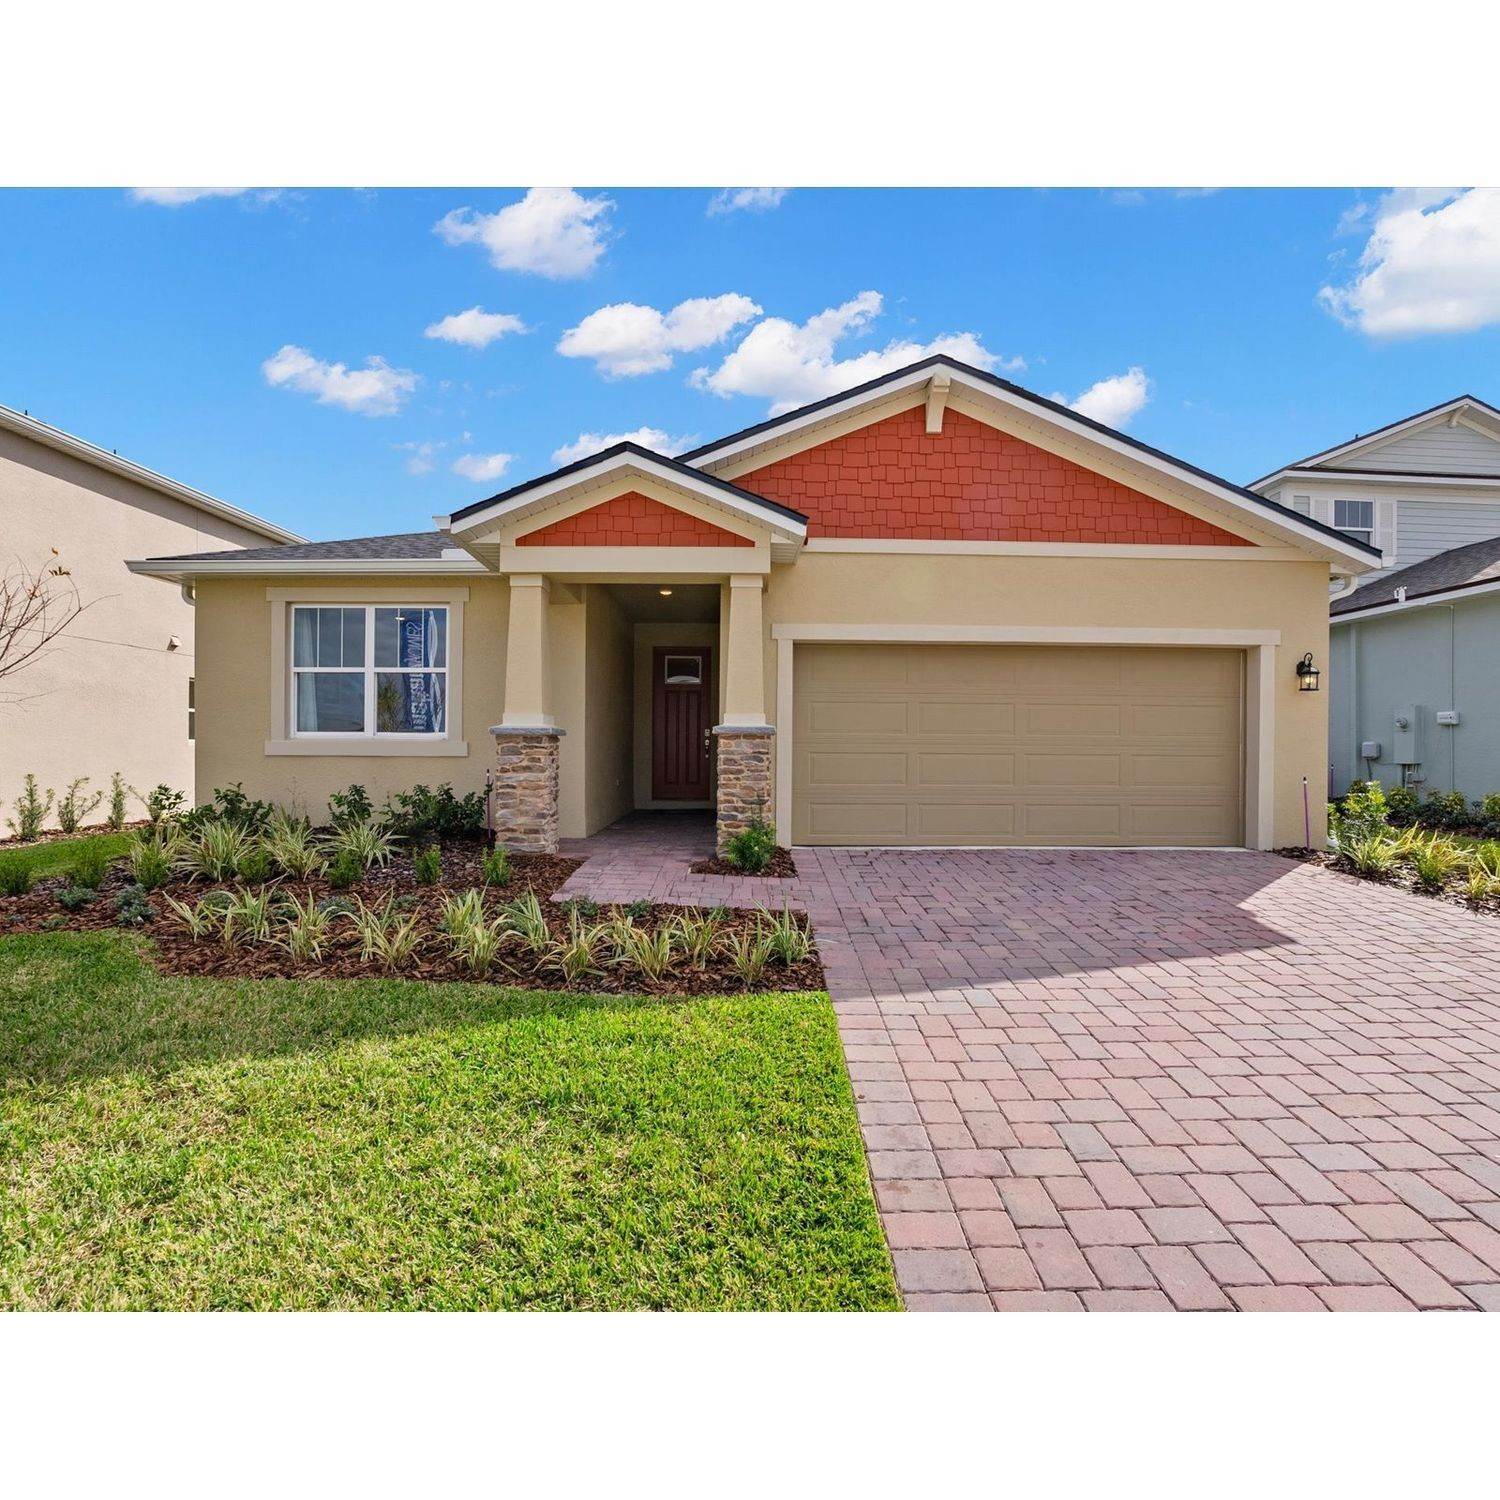 13. Waterbrooke building at 3029 Ambersweet Place, Clermont, FL 34711